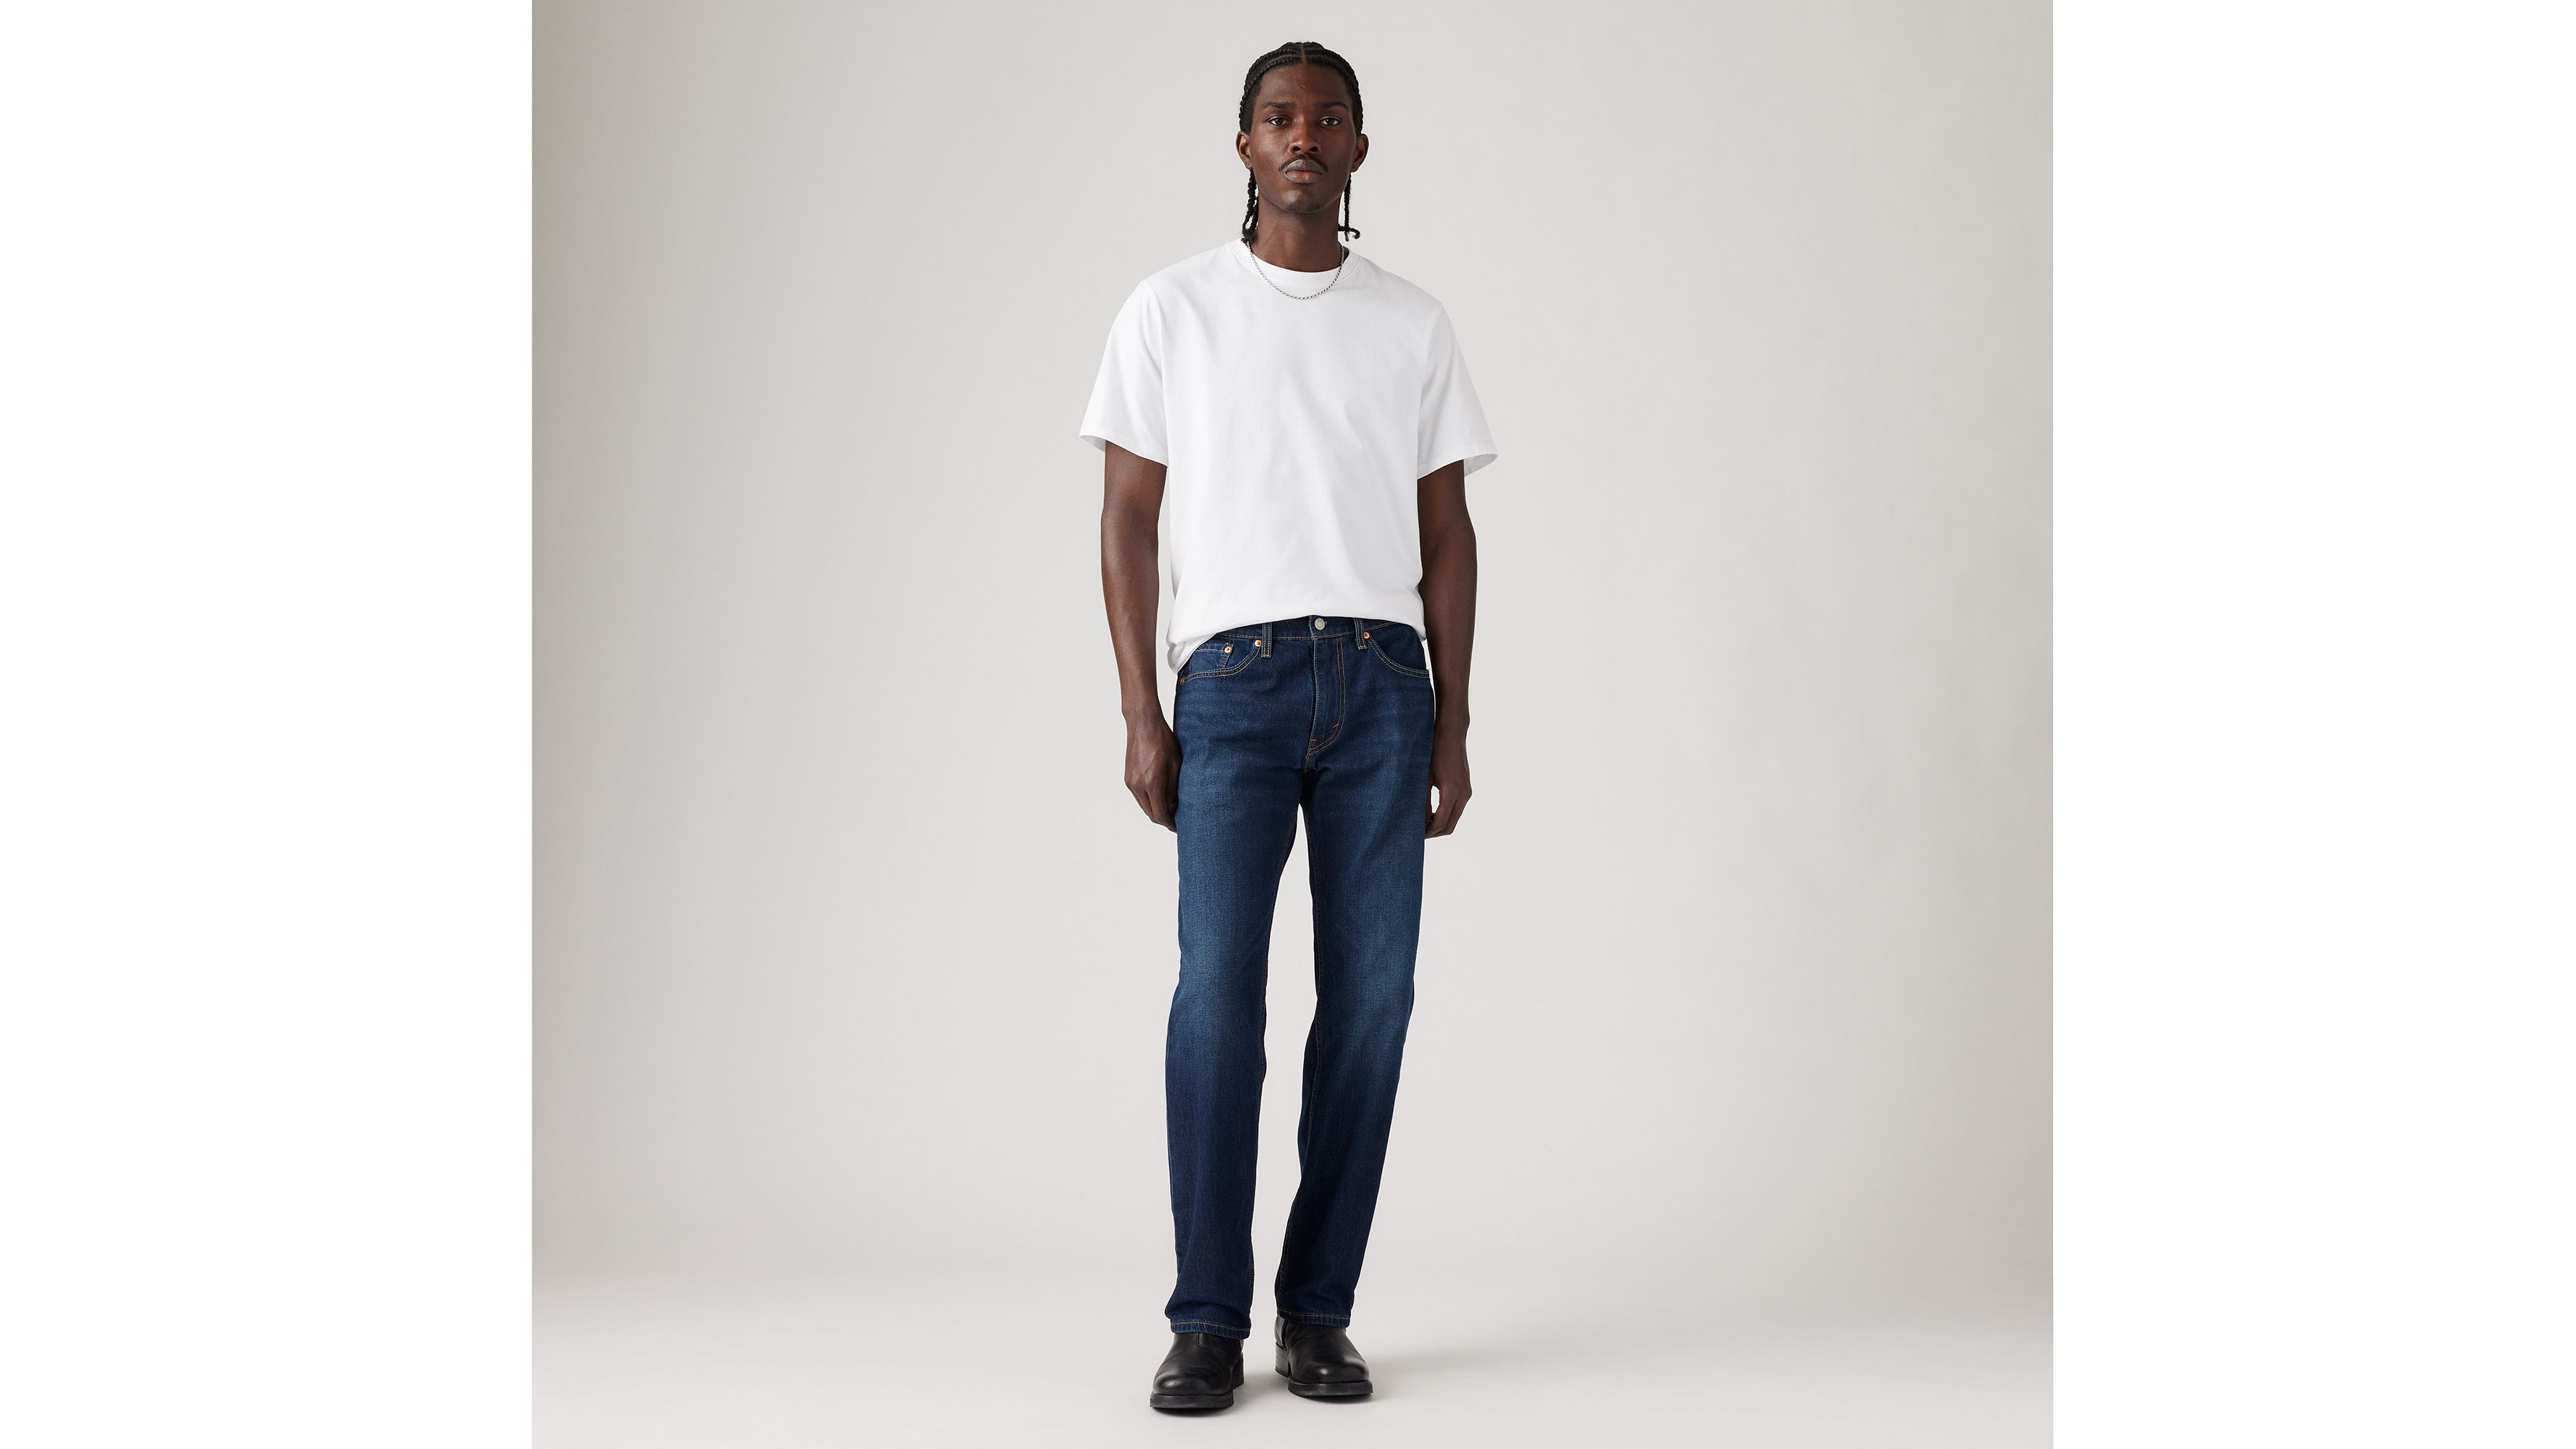 559™ Relaxed Straight Fit Men's Jeans - Dark Wash | Levi's® US